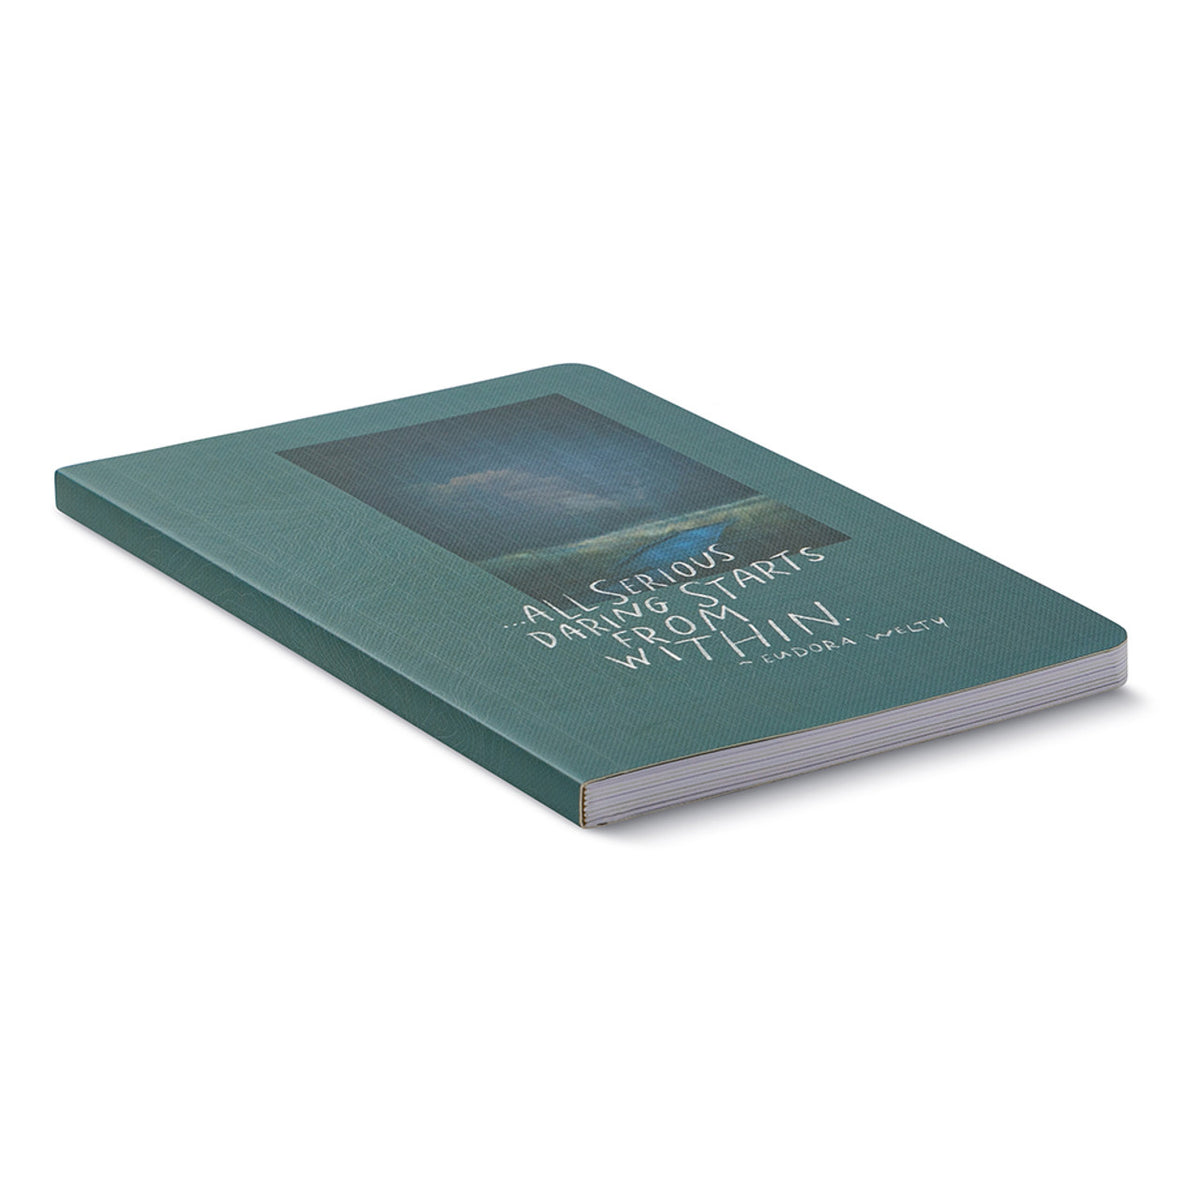 &quot;...All Serious Daring Starts From Within&quot; — Eudora Welty Write Now Softcover Journal